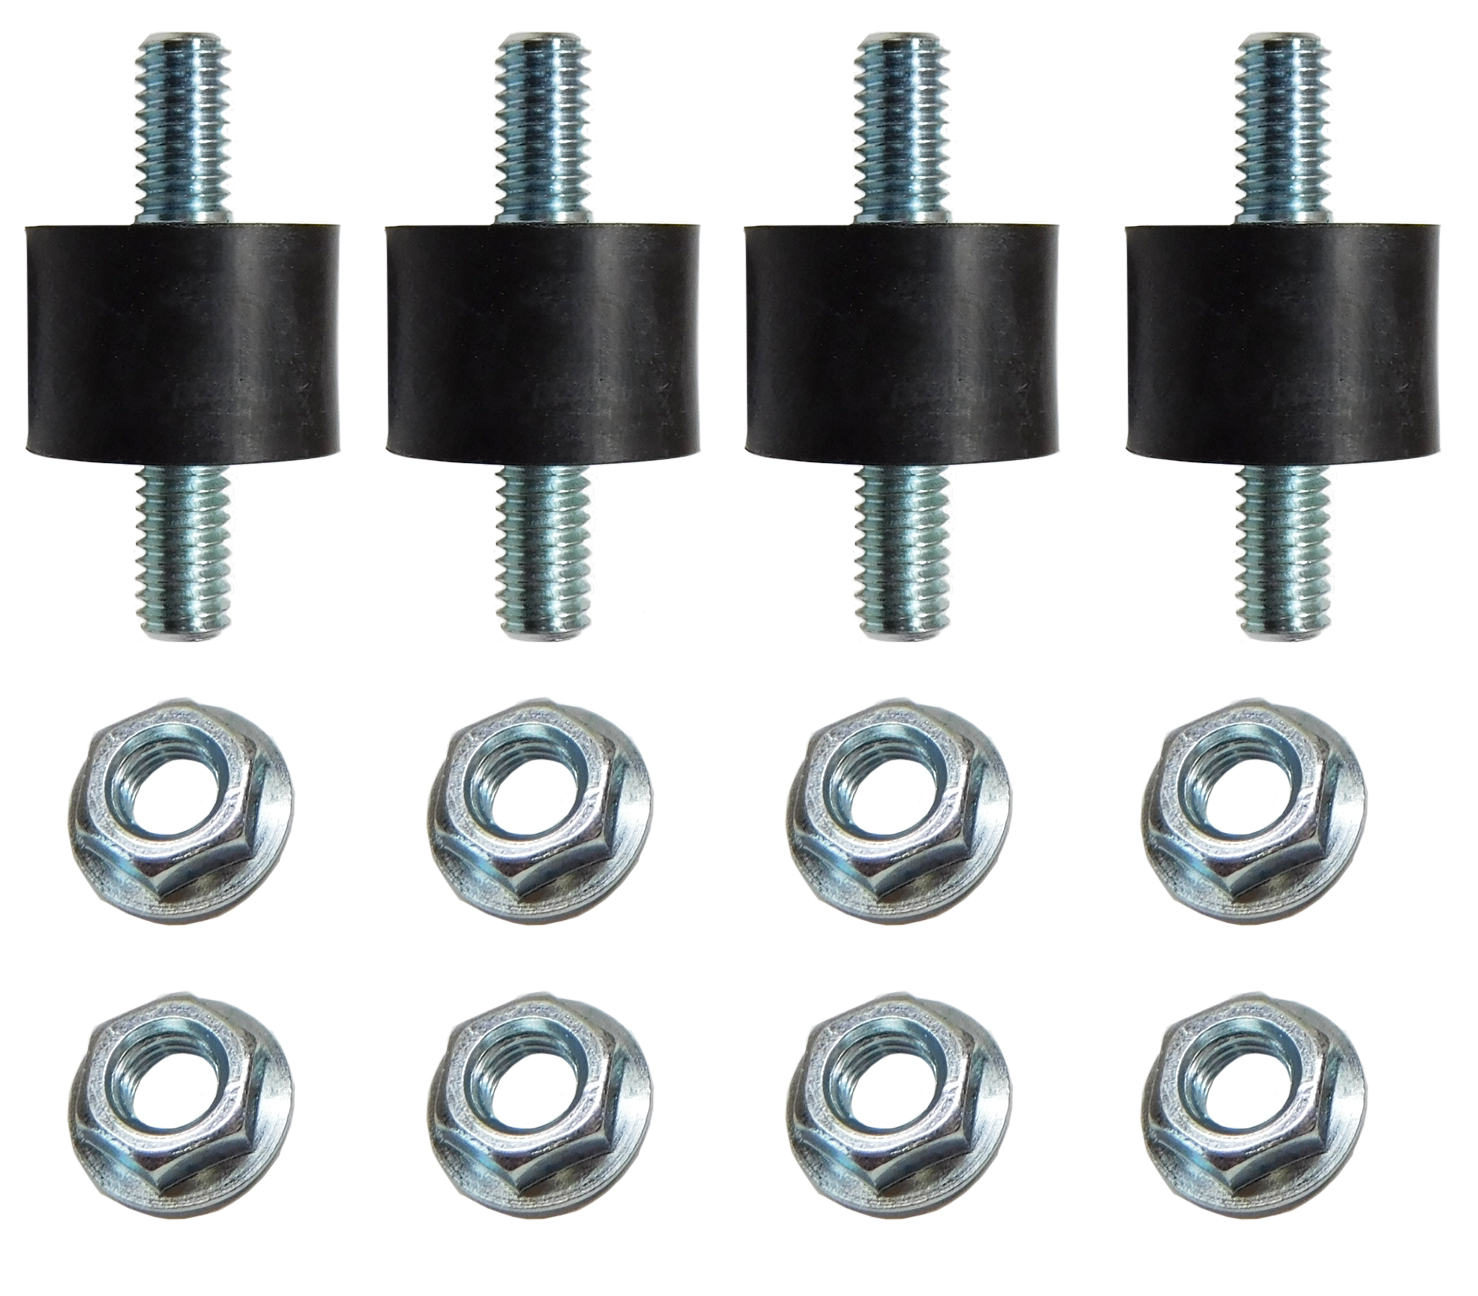 1976 Pontiac GTO/LeMans/Tempest AIR CONDITIONING MOUNTING STUD INSULATOR (THIS IS THE 3/4'' ROUND RUBBER INSULATOR WITH A 5/16'' STUD ON EACH END) - KIT (4 PIECE) | AC1234Z